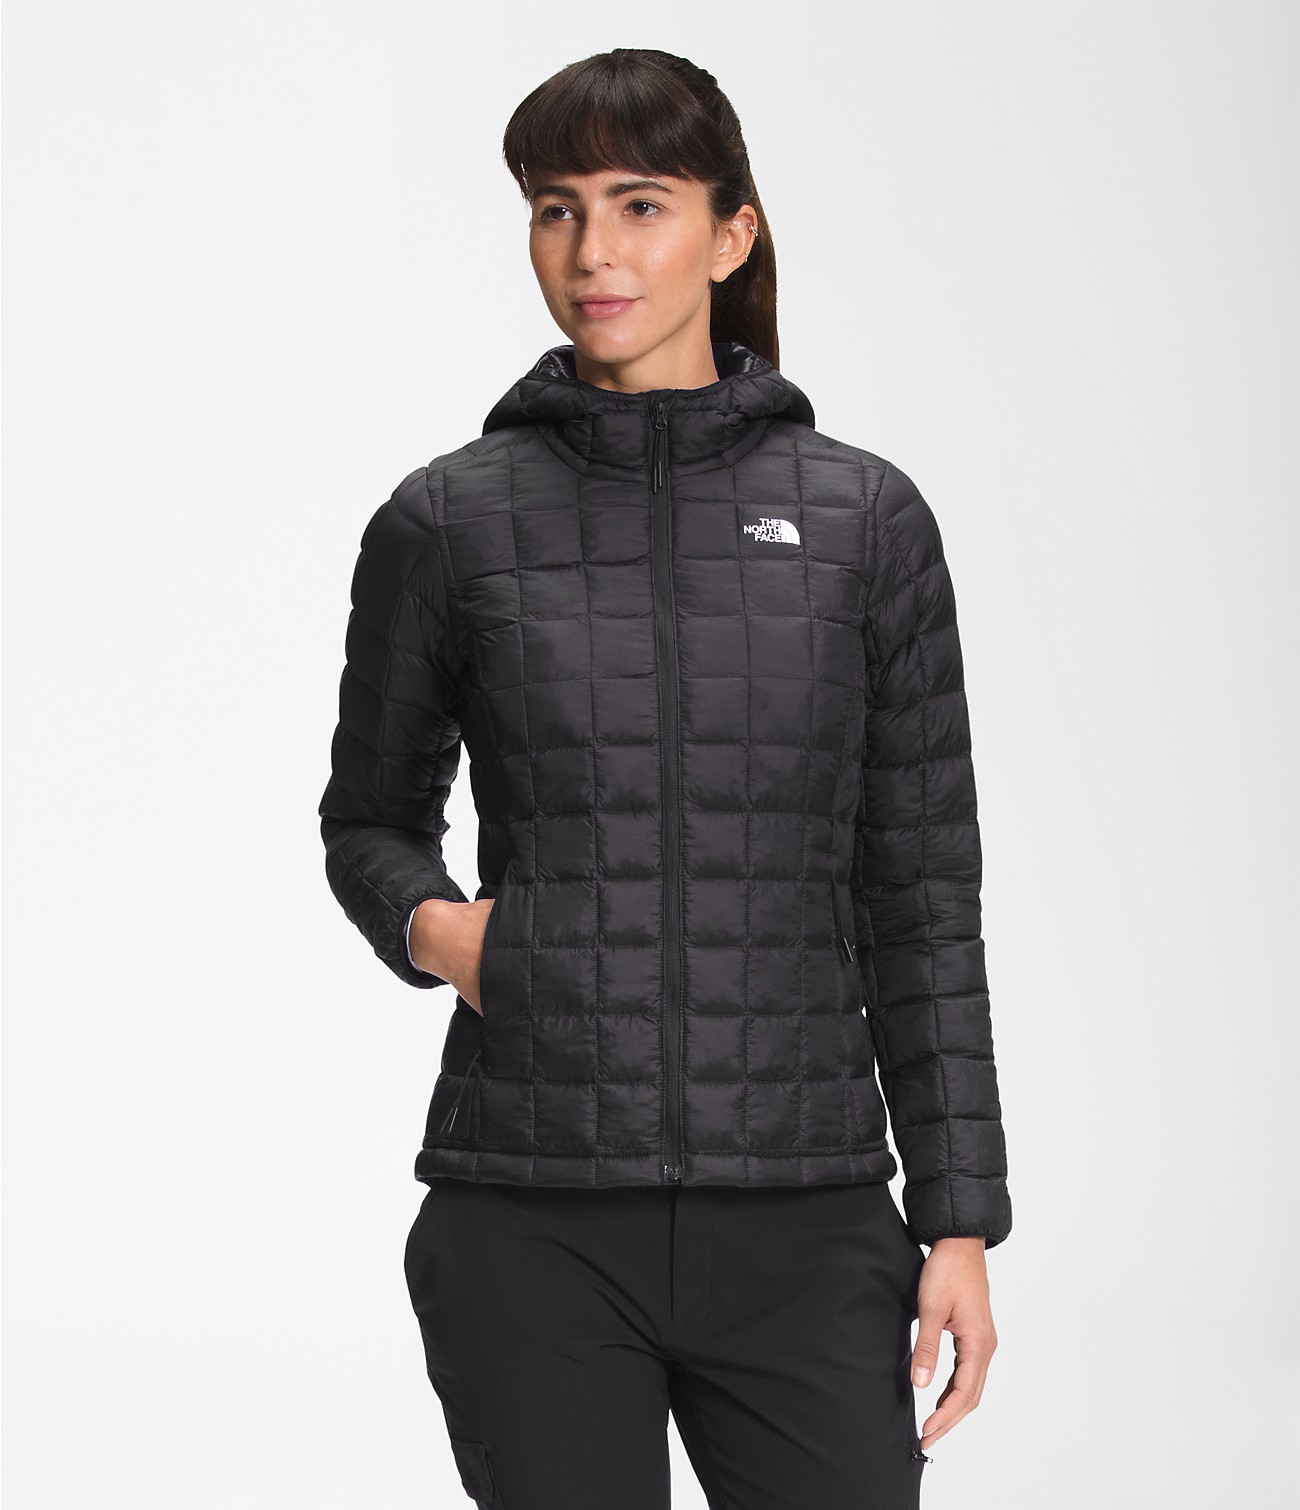 Unlock Wilderness' choice in the Mountain Hardwear Vs North Face comparison, the ThermoBall™ Eco Hoodie 2.0 by The North Face